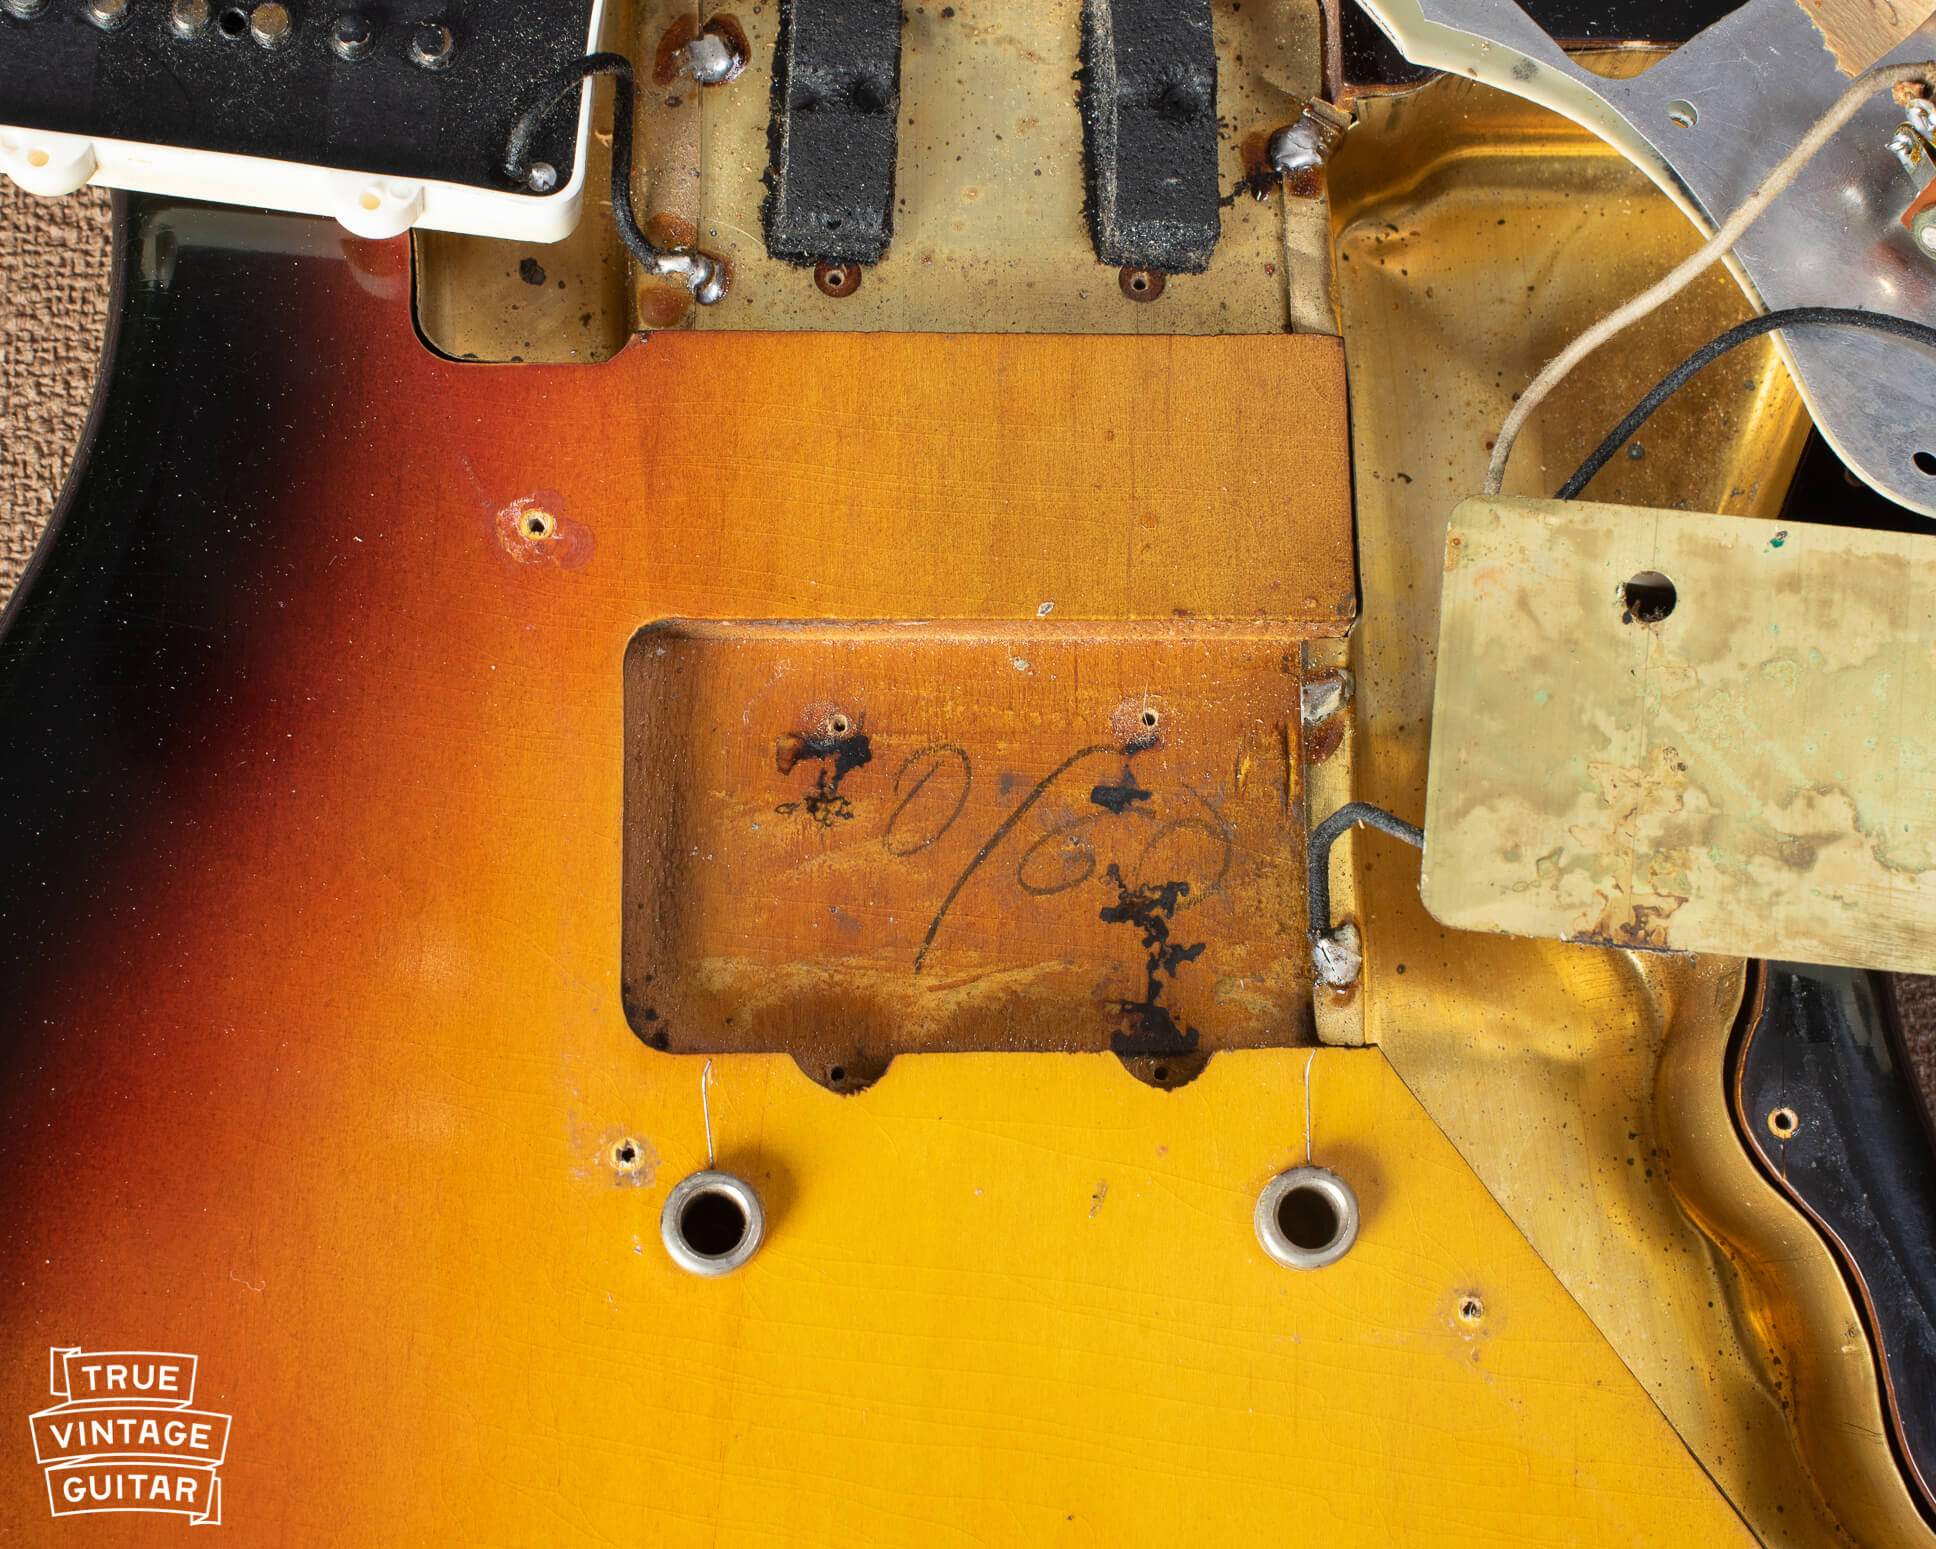 How to date Fender Jazzmaster with bridge pickup cavity pencil date